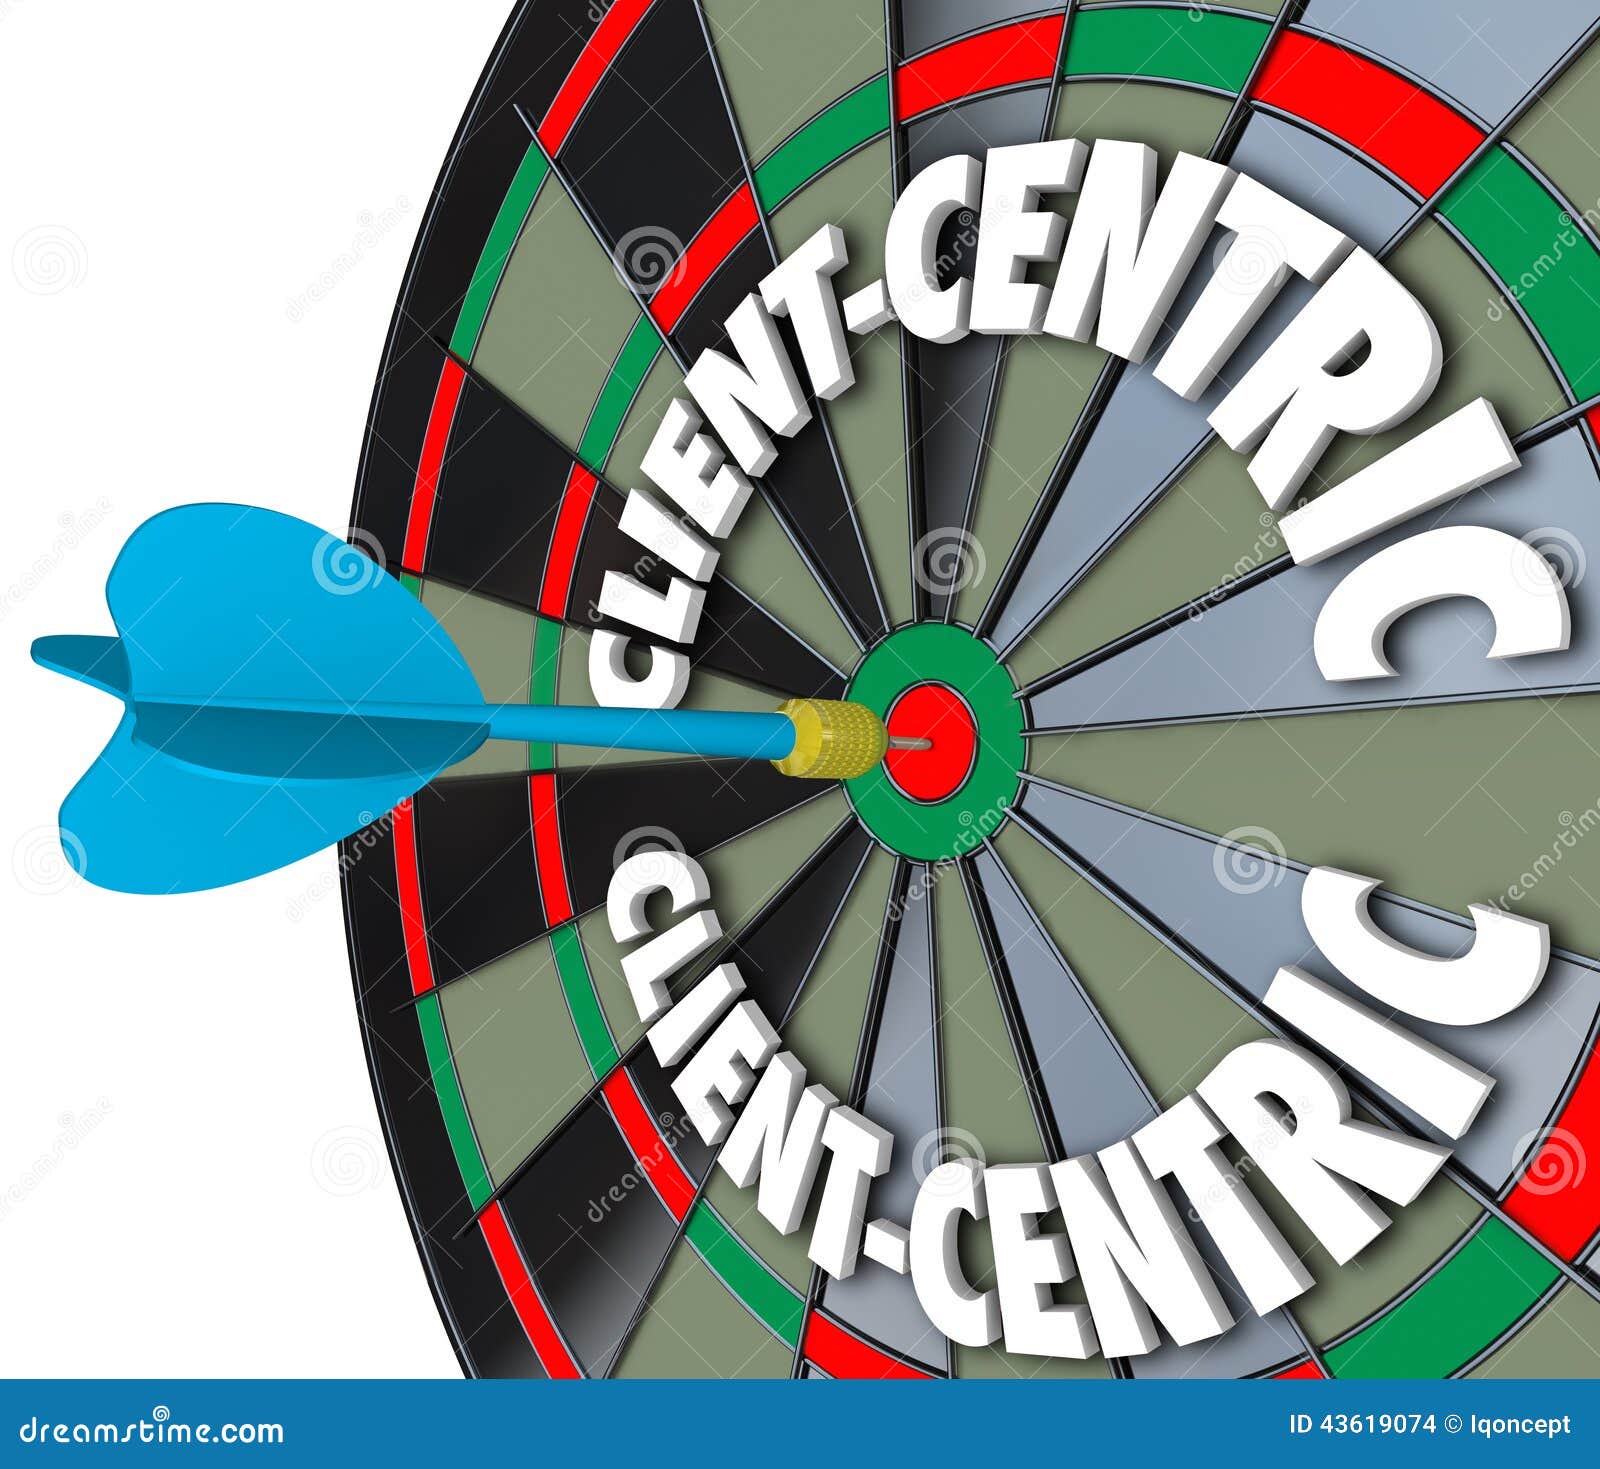 client-centric words dart board targeting customer service